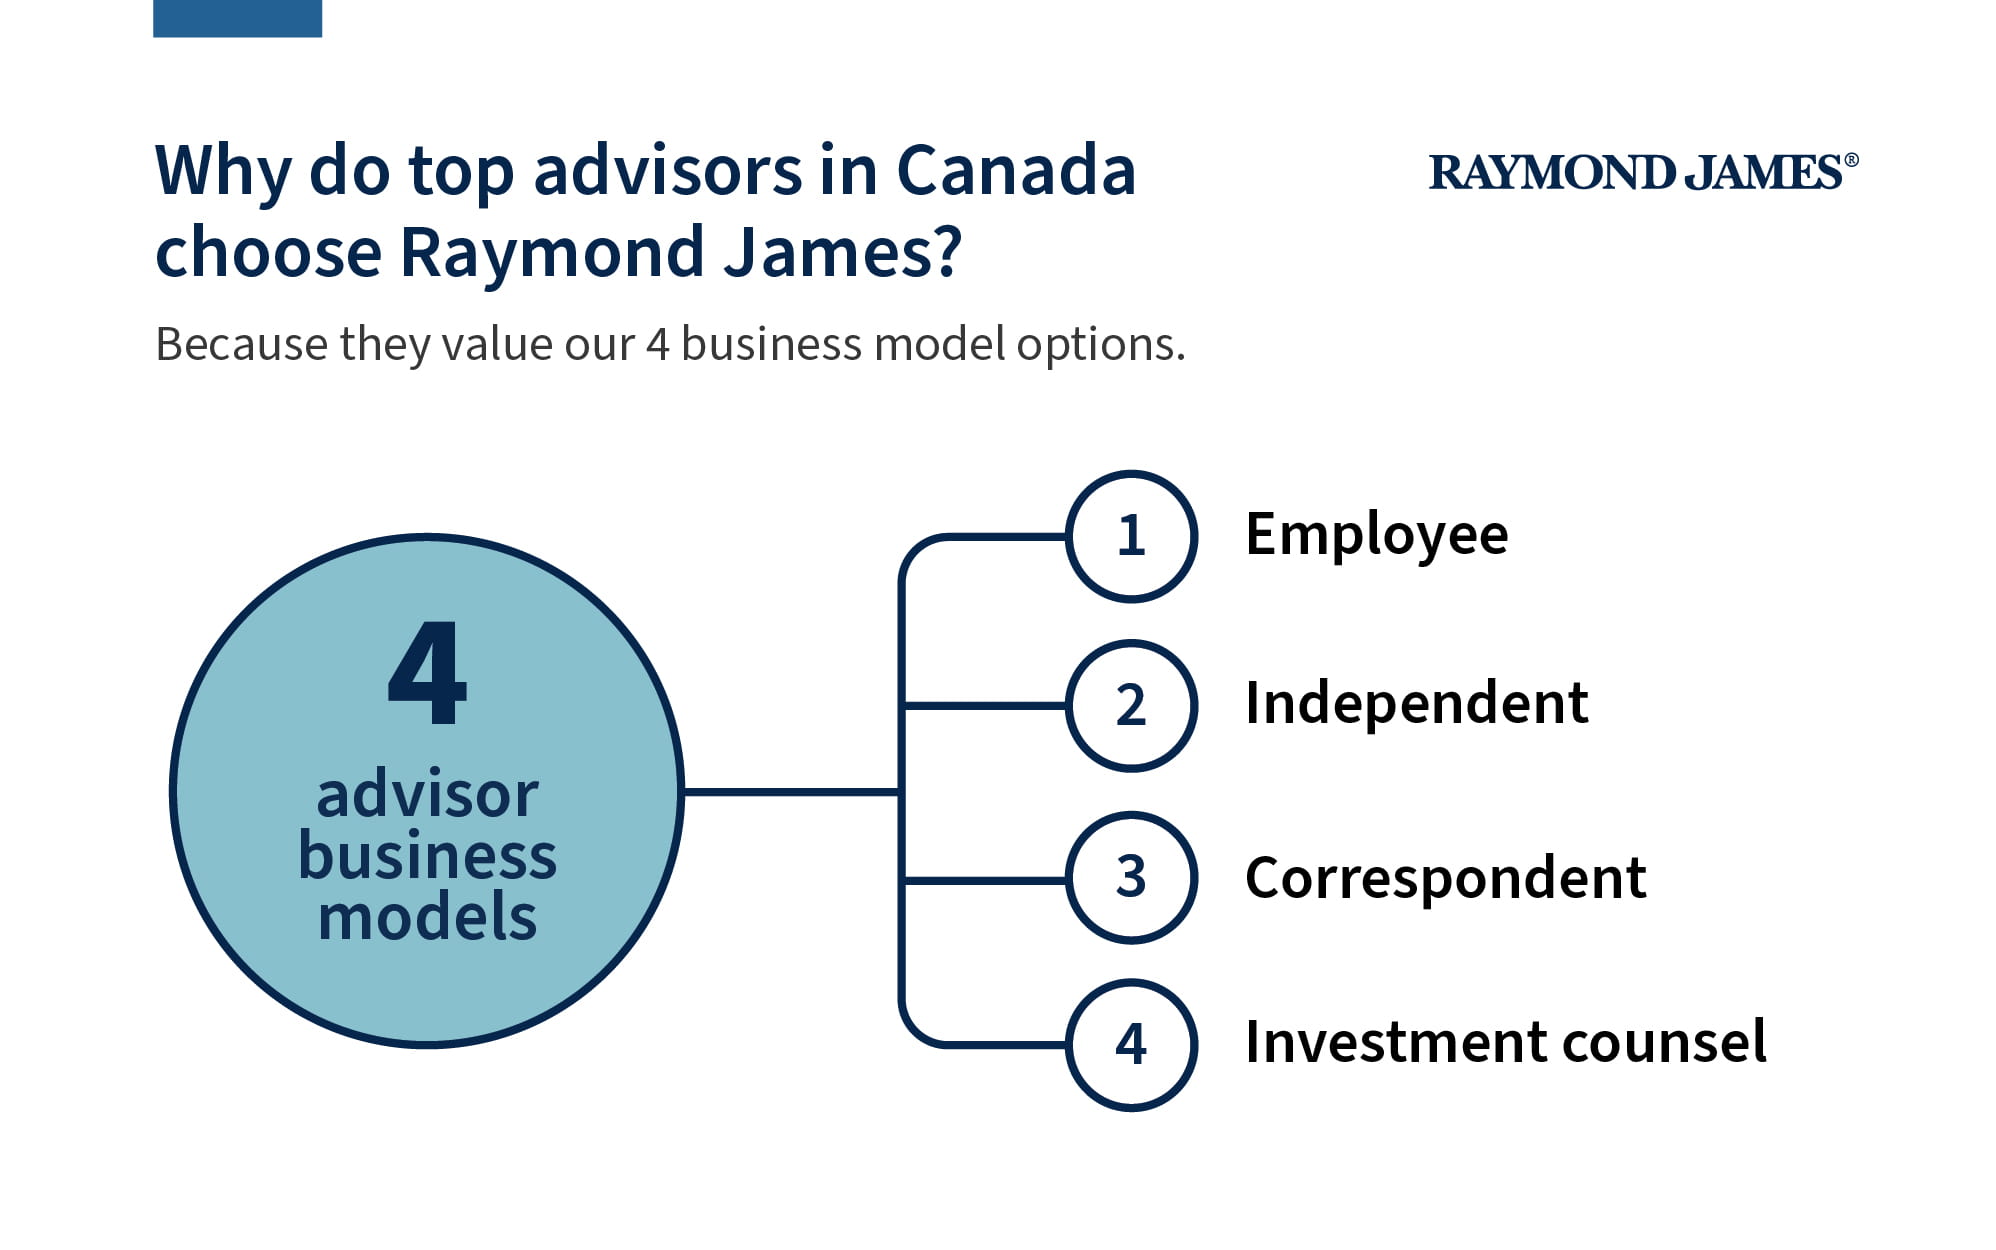 Why do top advisors in Canada choose Raymond James? Because they value our 4 business model options 4 advisors business models 1.	Employee 2.	Independent 3.	Correspondent  4.	Investment counsel